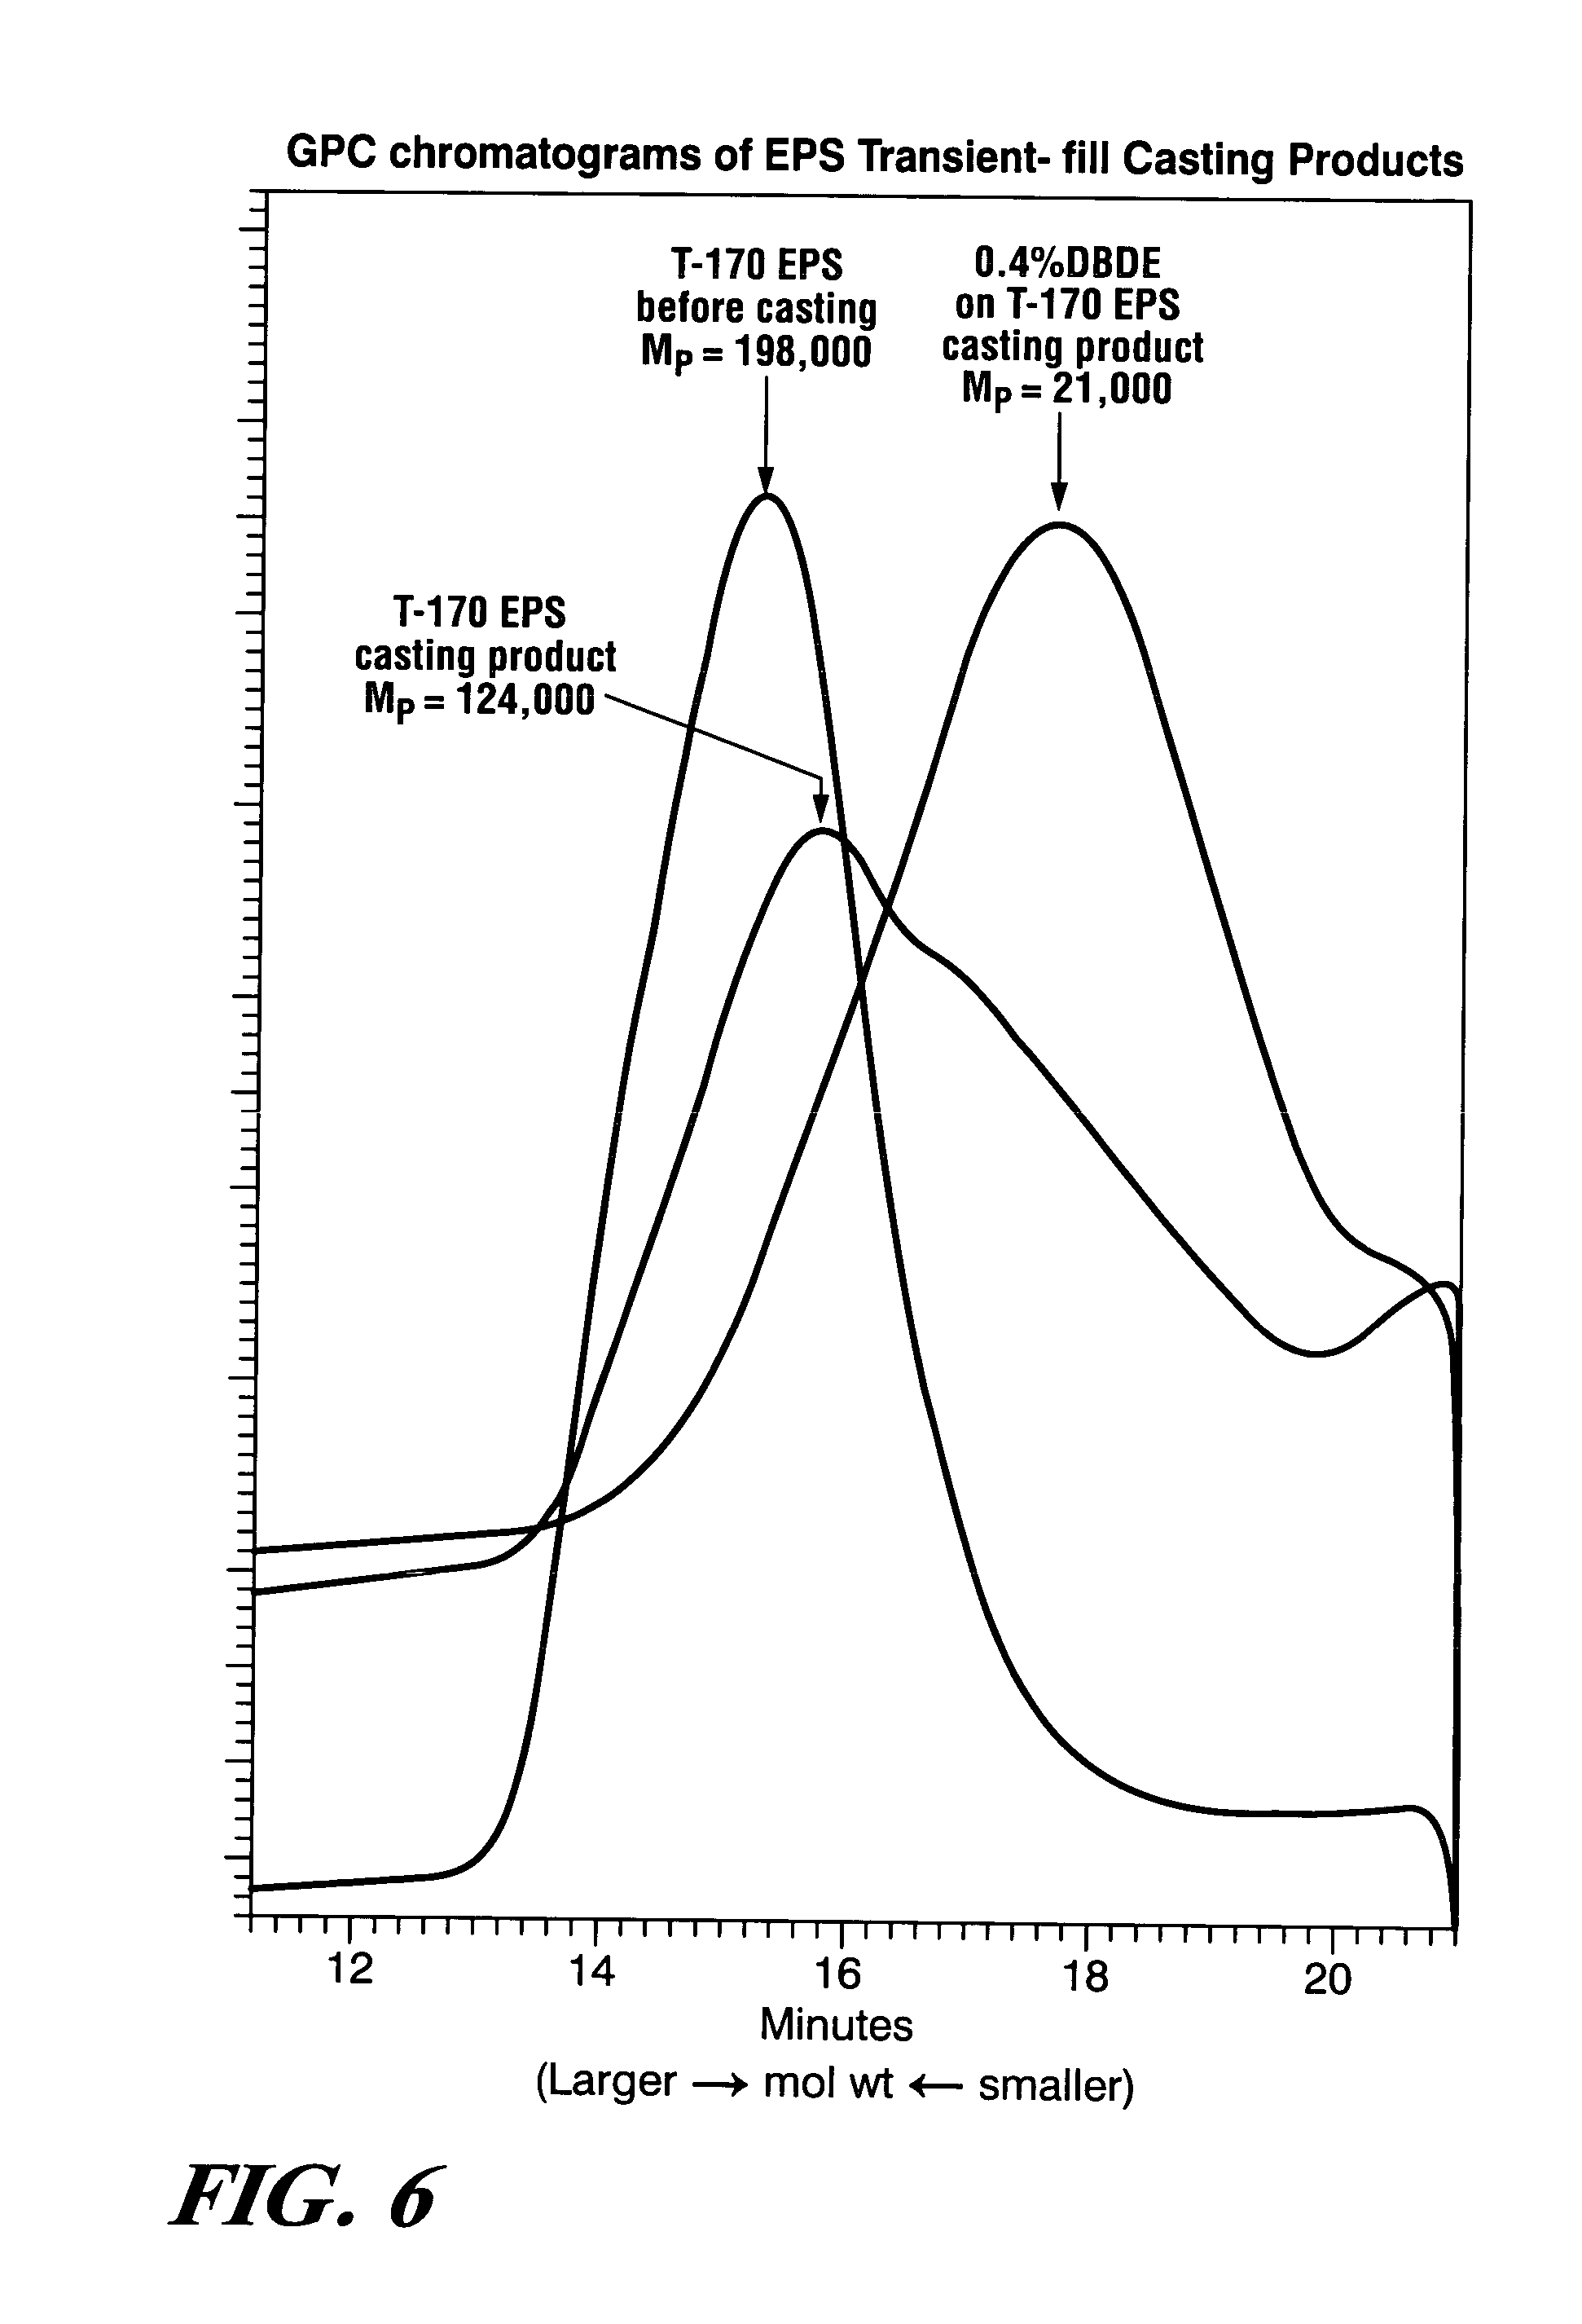 Method of incorporating brominated compounds as additives to expanded polystyrene molded patterns for use in lost foam aluminum casting